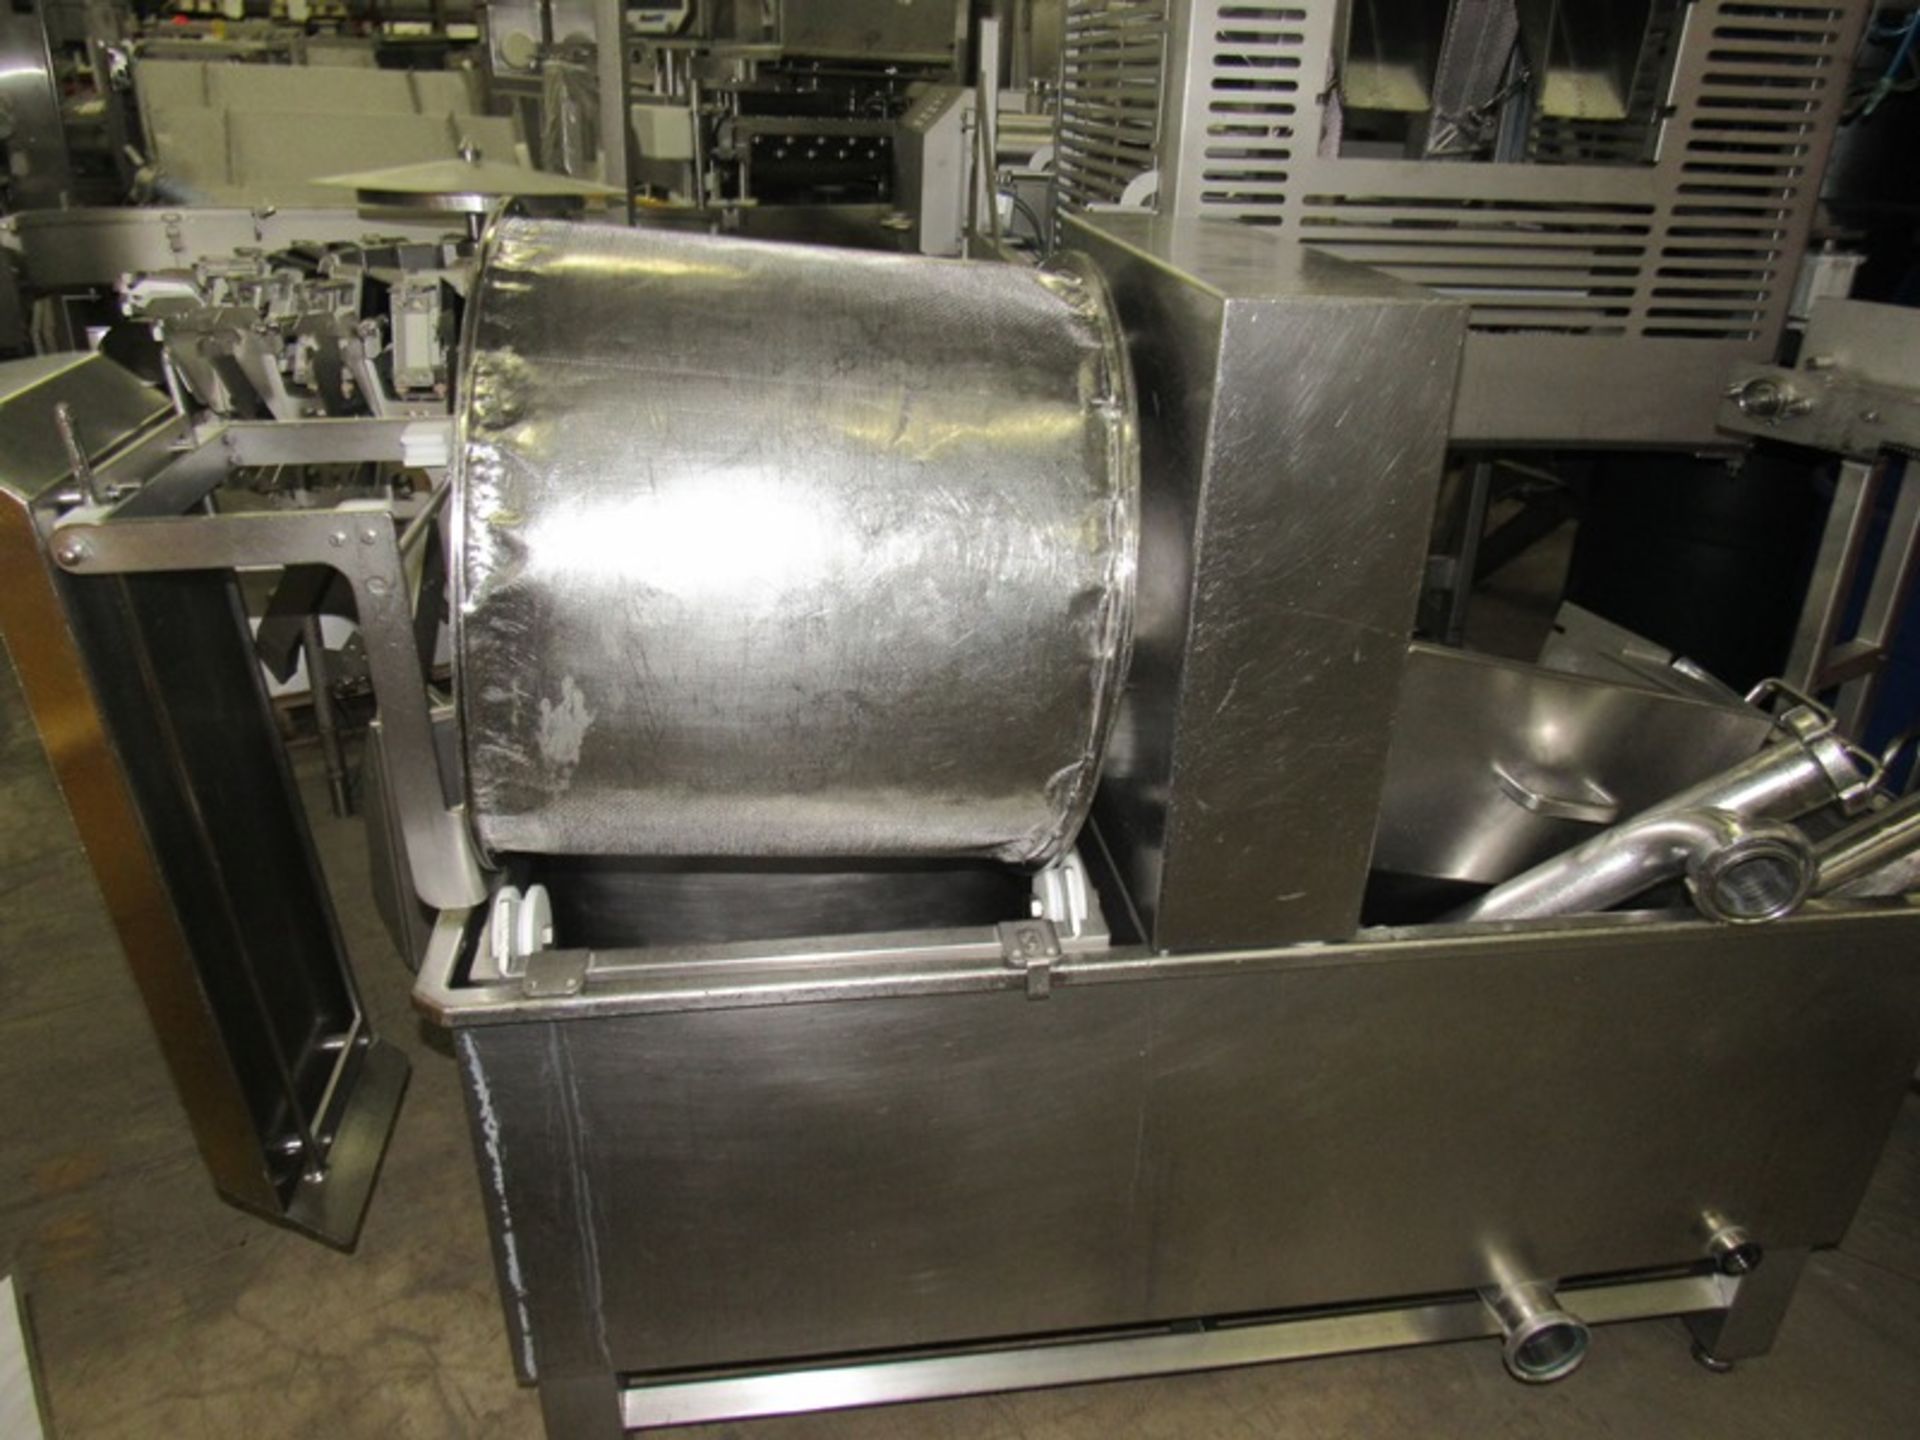 Schroeder Mdl. IMAX630 Wolftec Injector, double head, 273 needles head, 24" W X 10' L intralox - Image 27 of 32